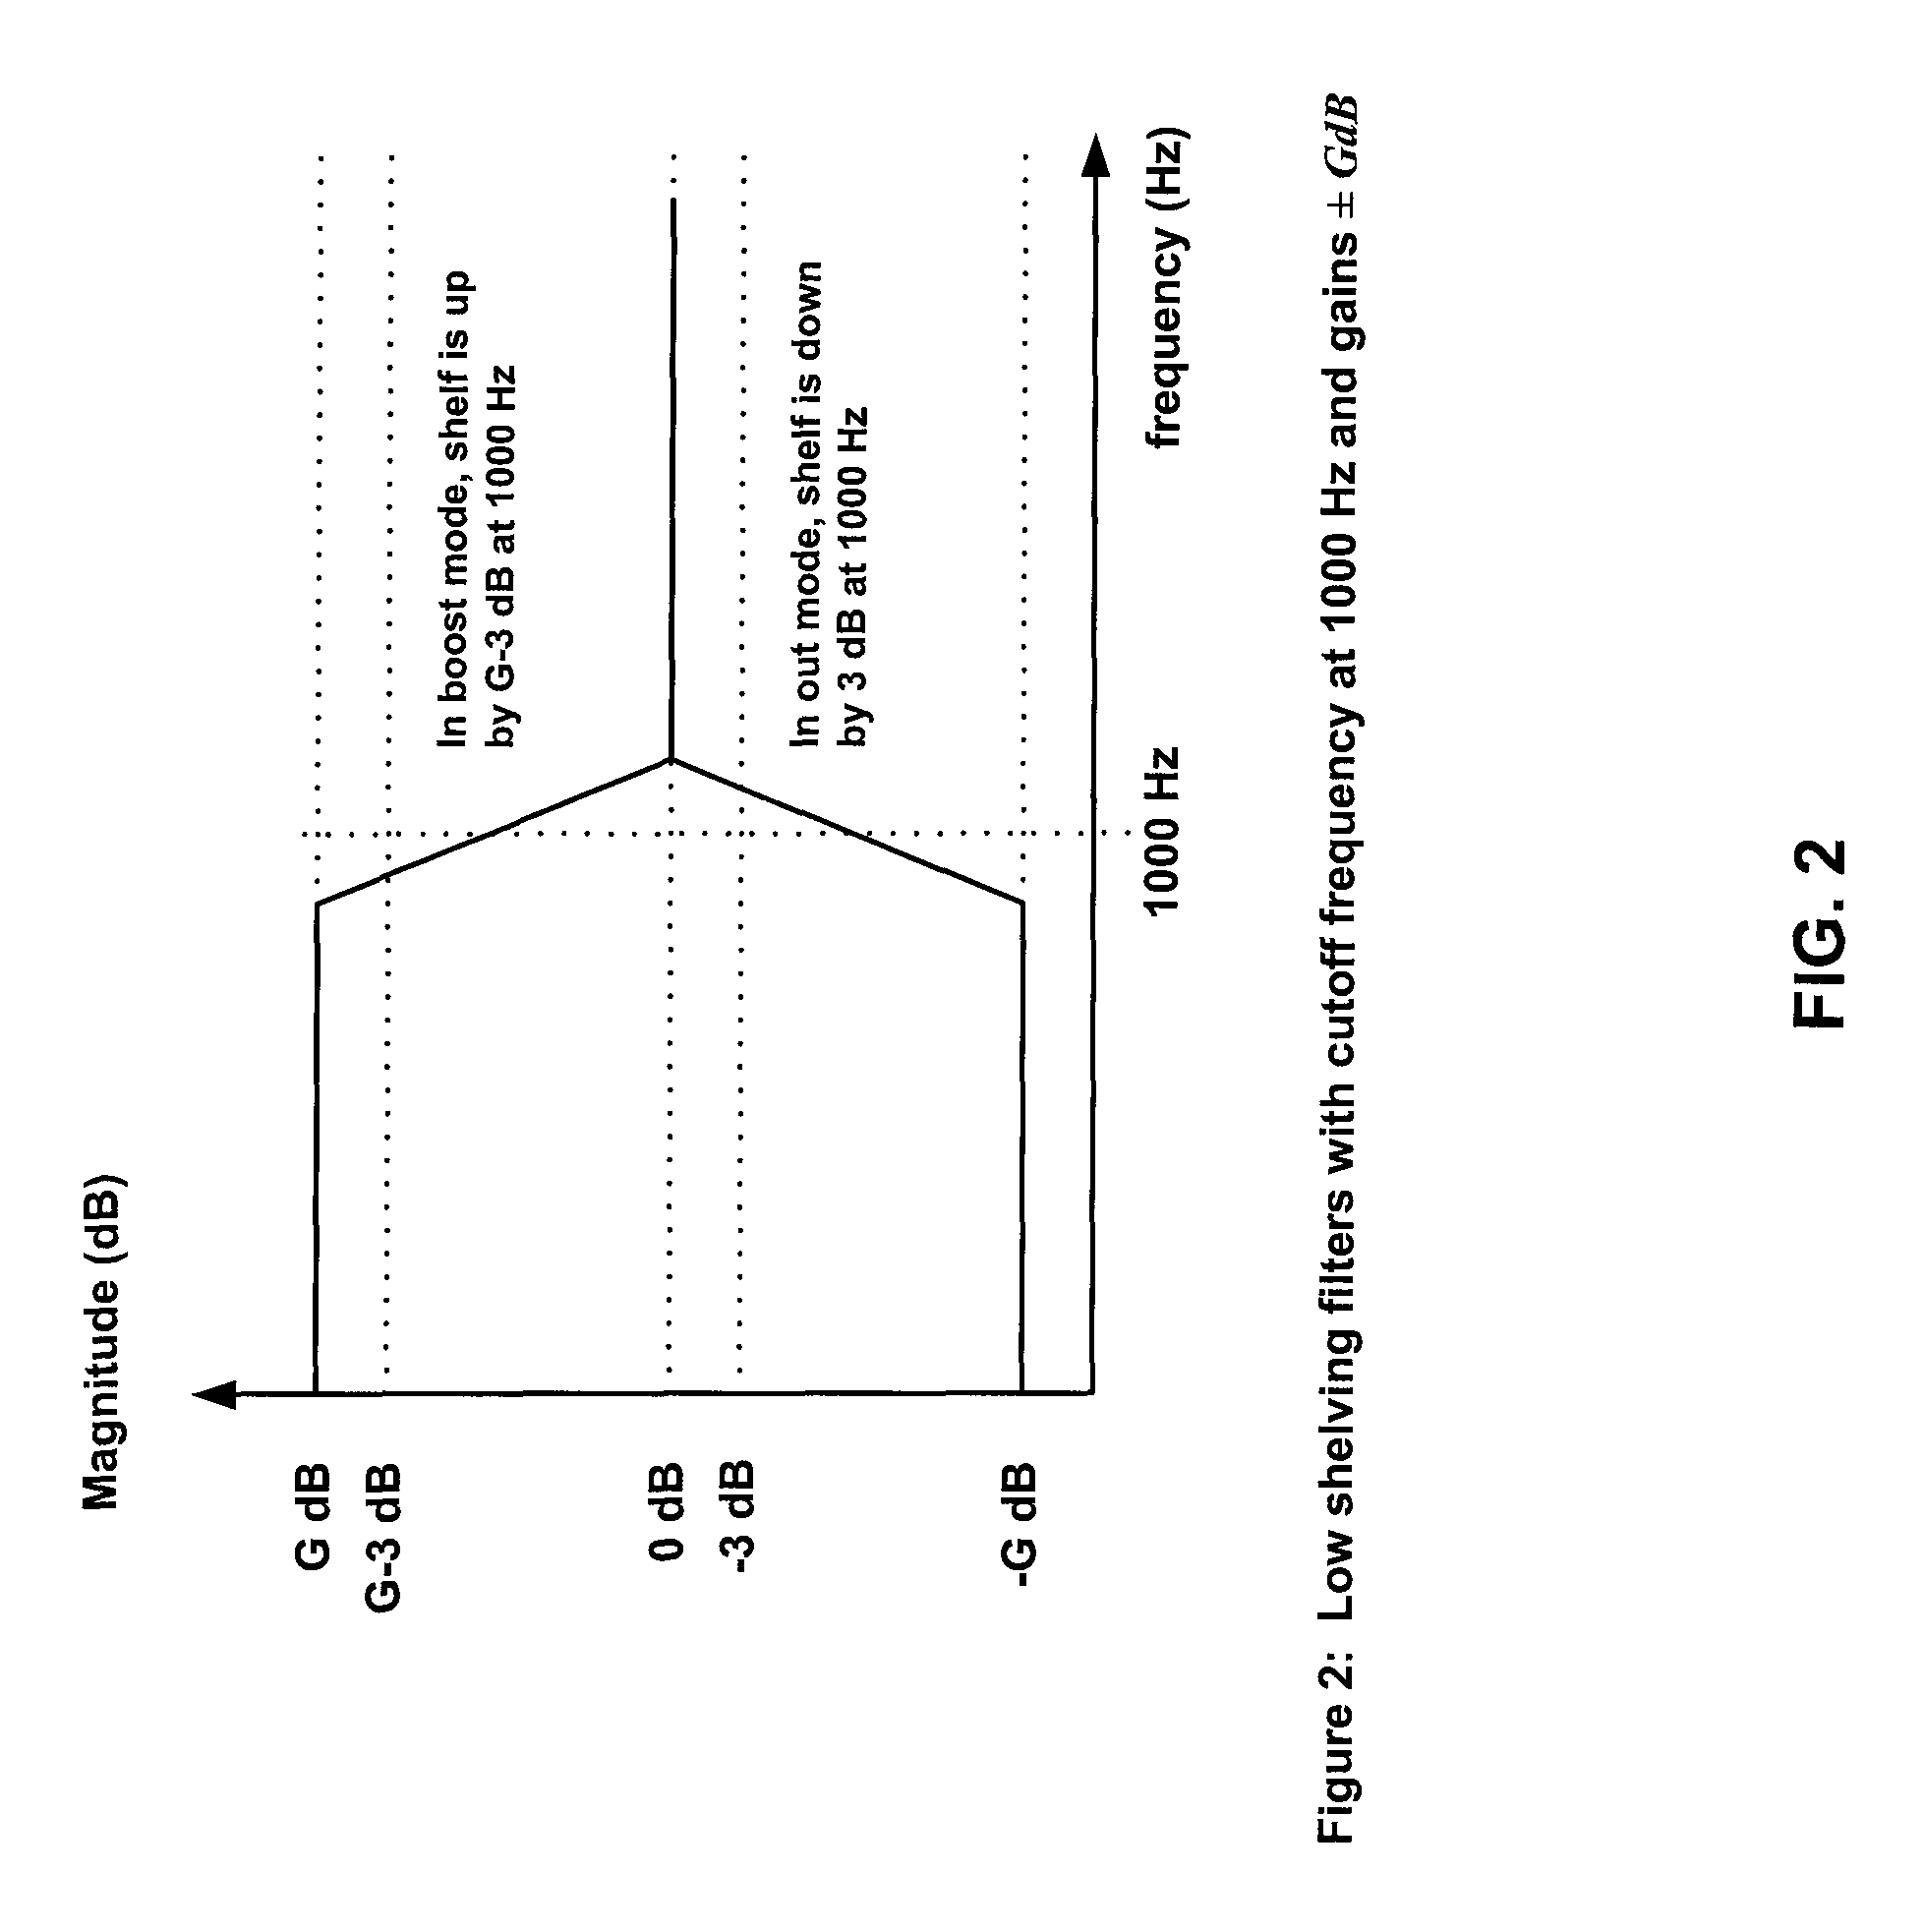 Ringtone enhancement systems and methods